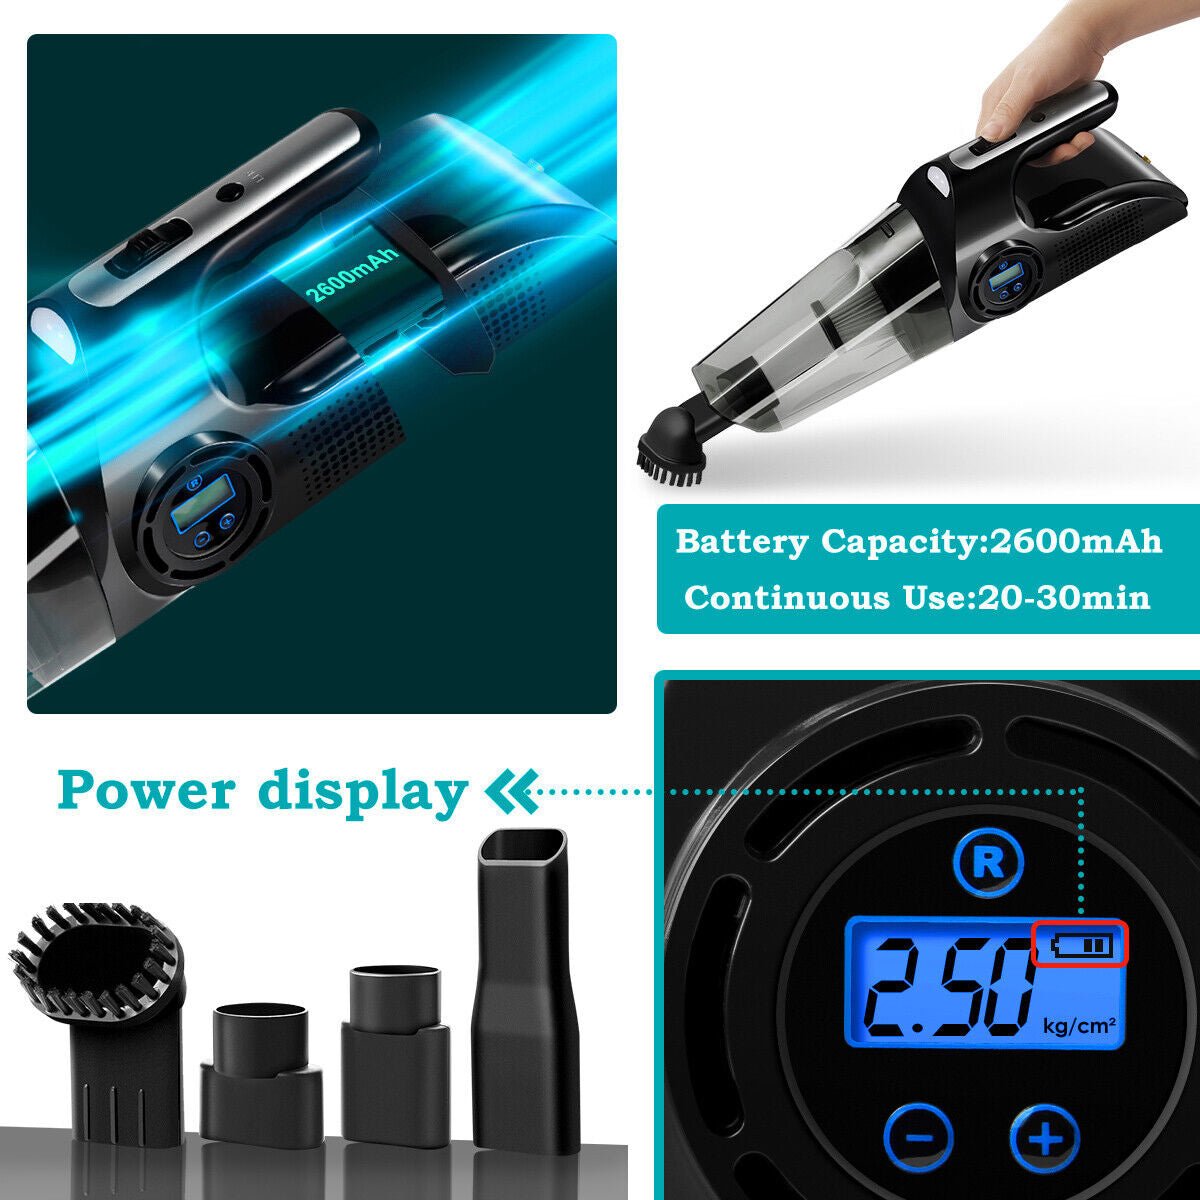 6000PA Cordless Vacuum Cleaner Powerful Car Handheld Vacuum USB Rechargeable - Ammpoure Wellbeing